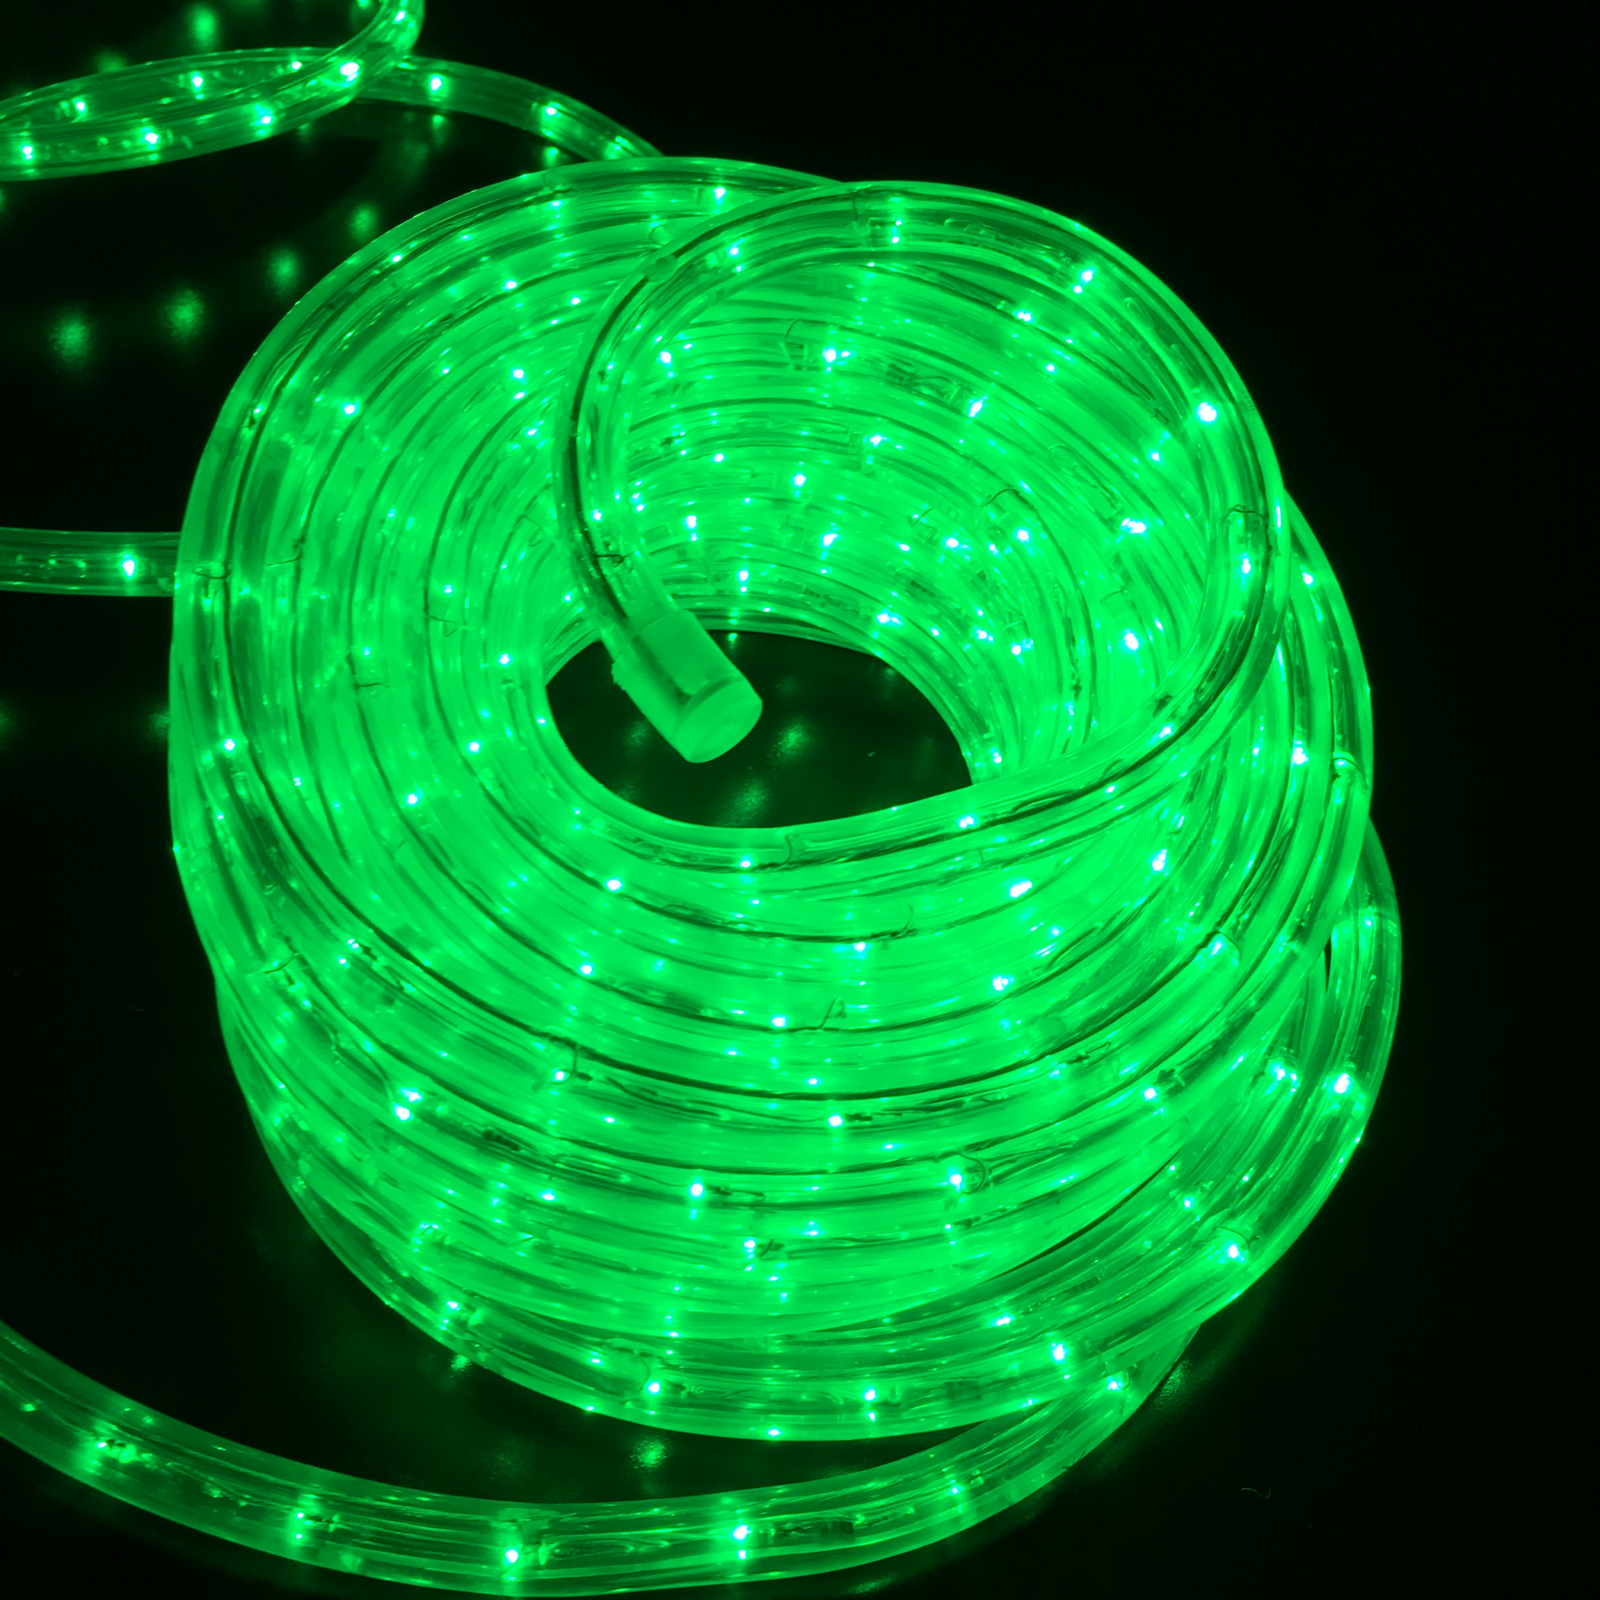 Buy Now LED Rope Light 12 Volt GREEN 10 metres online from Christmas ...